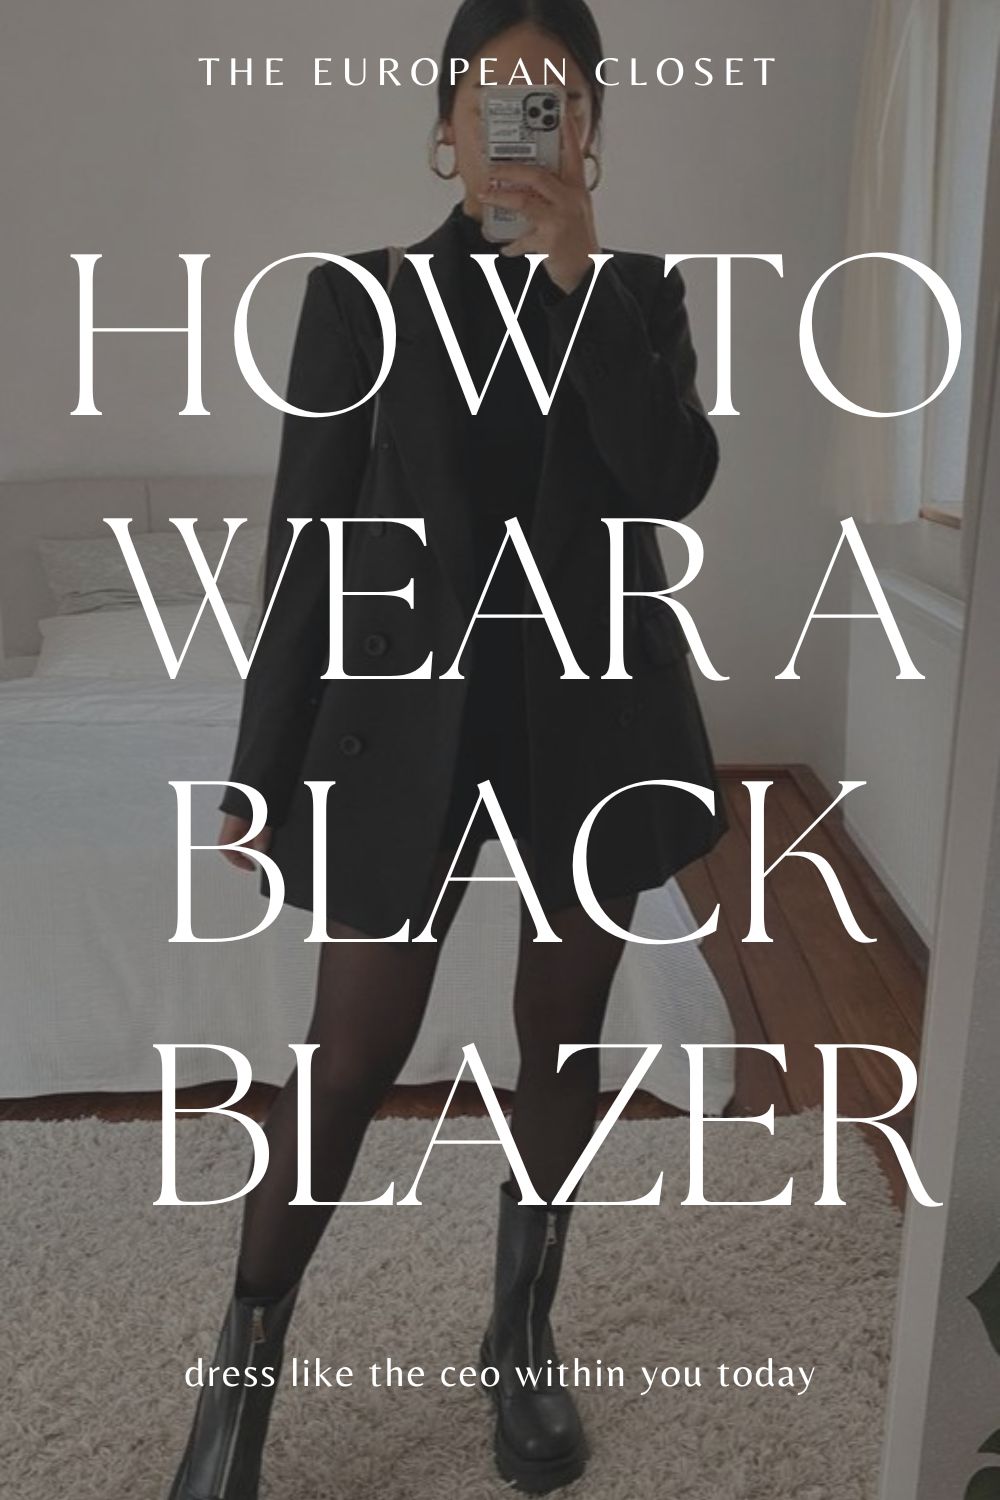 Do you have a black blazer lying at home and don't know how to style it? Don't worry, I've got you covered witht this "how to style a black blazer" post.